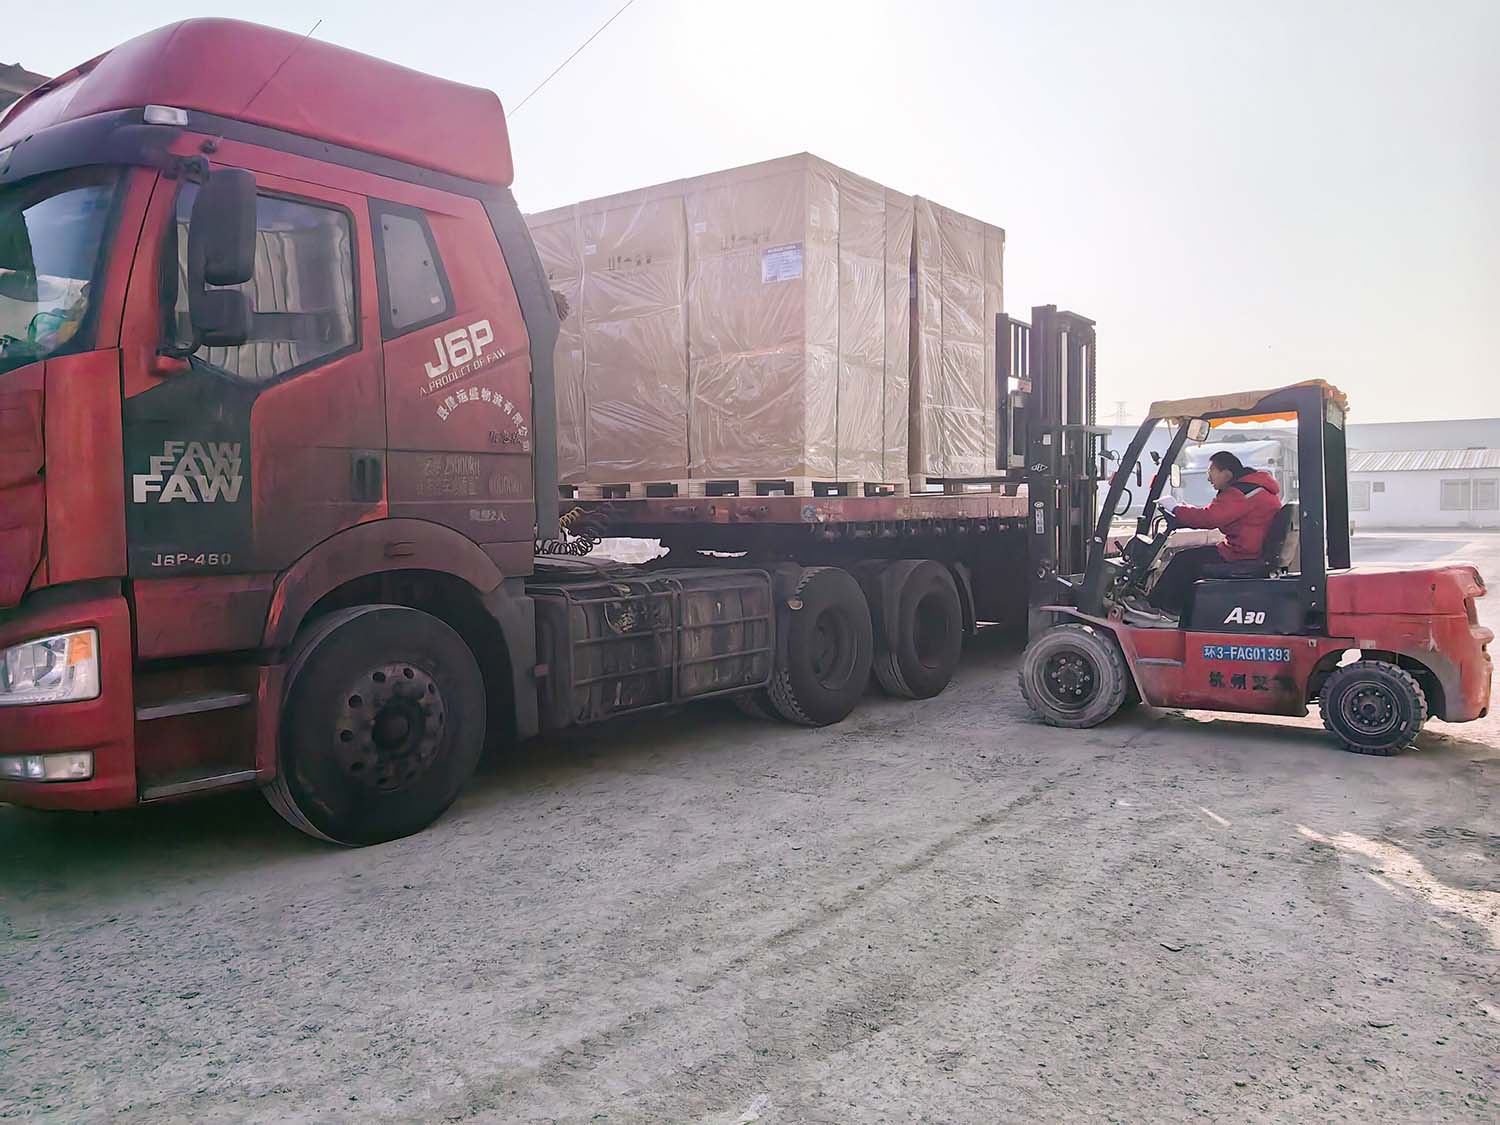 BIOBASE sent more than 300 medical equipment to Central Asia